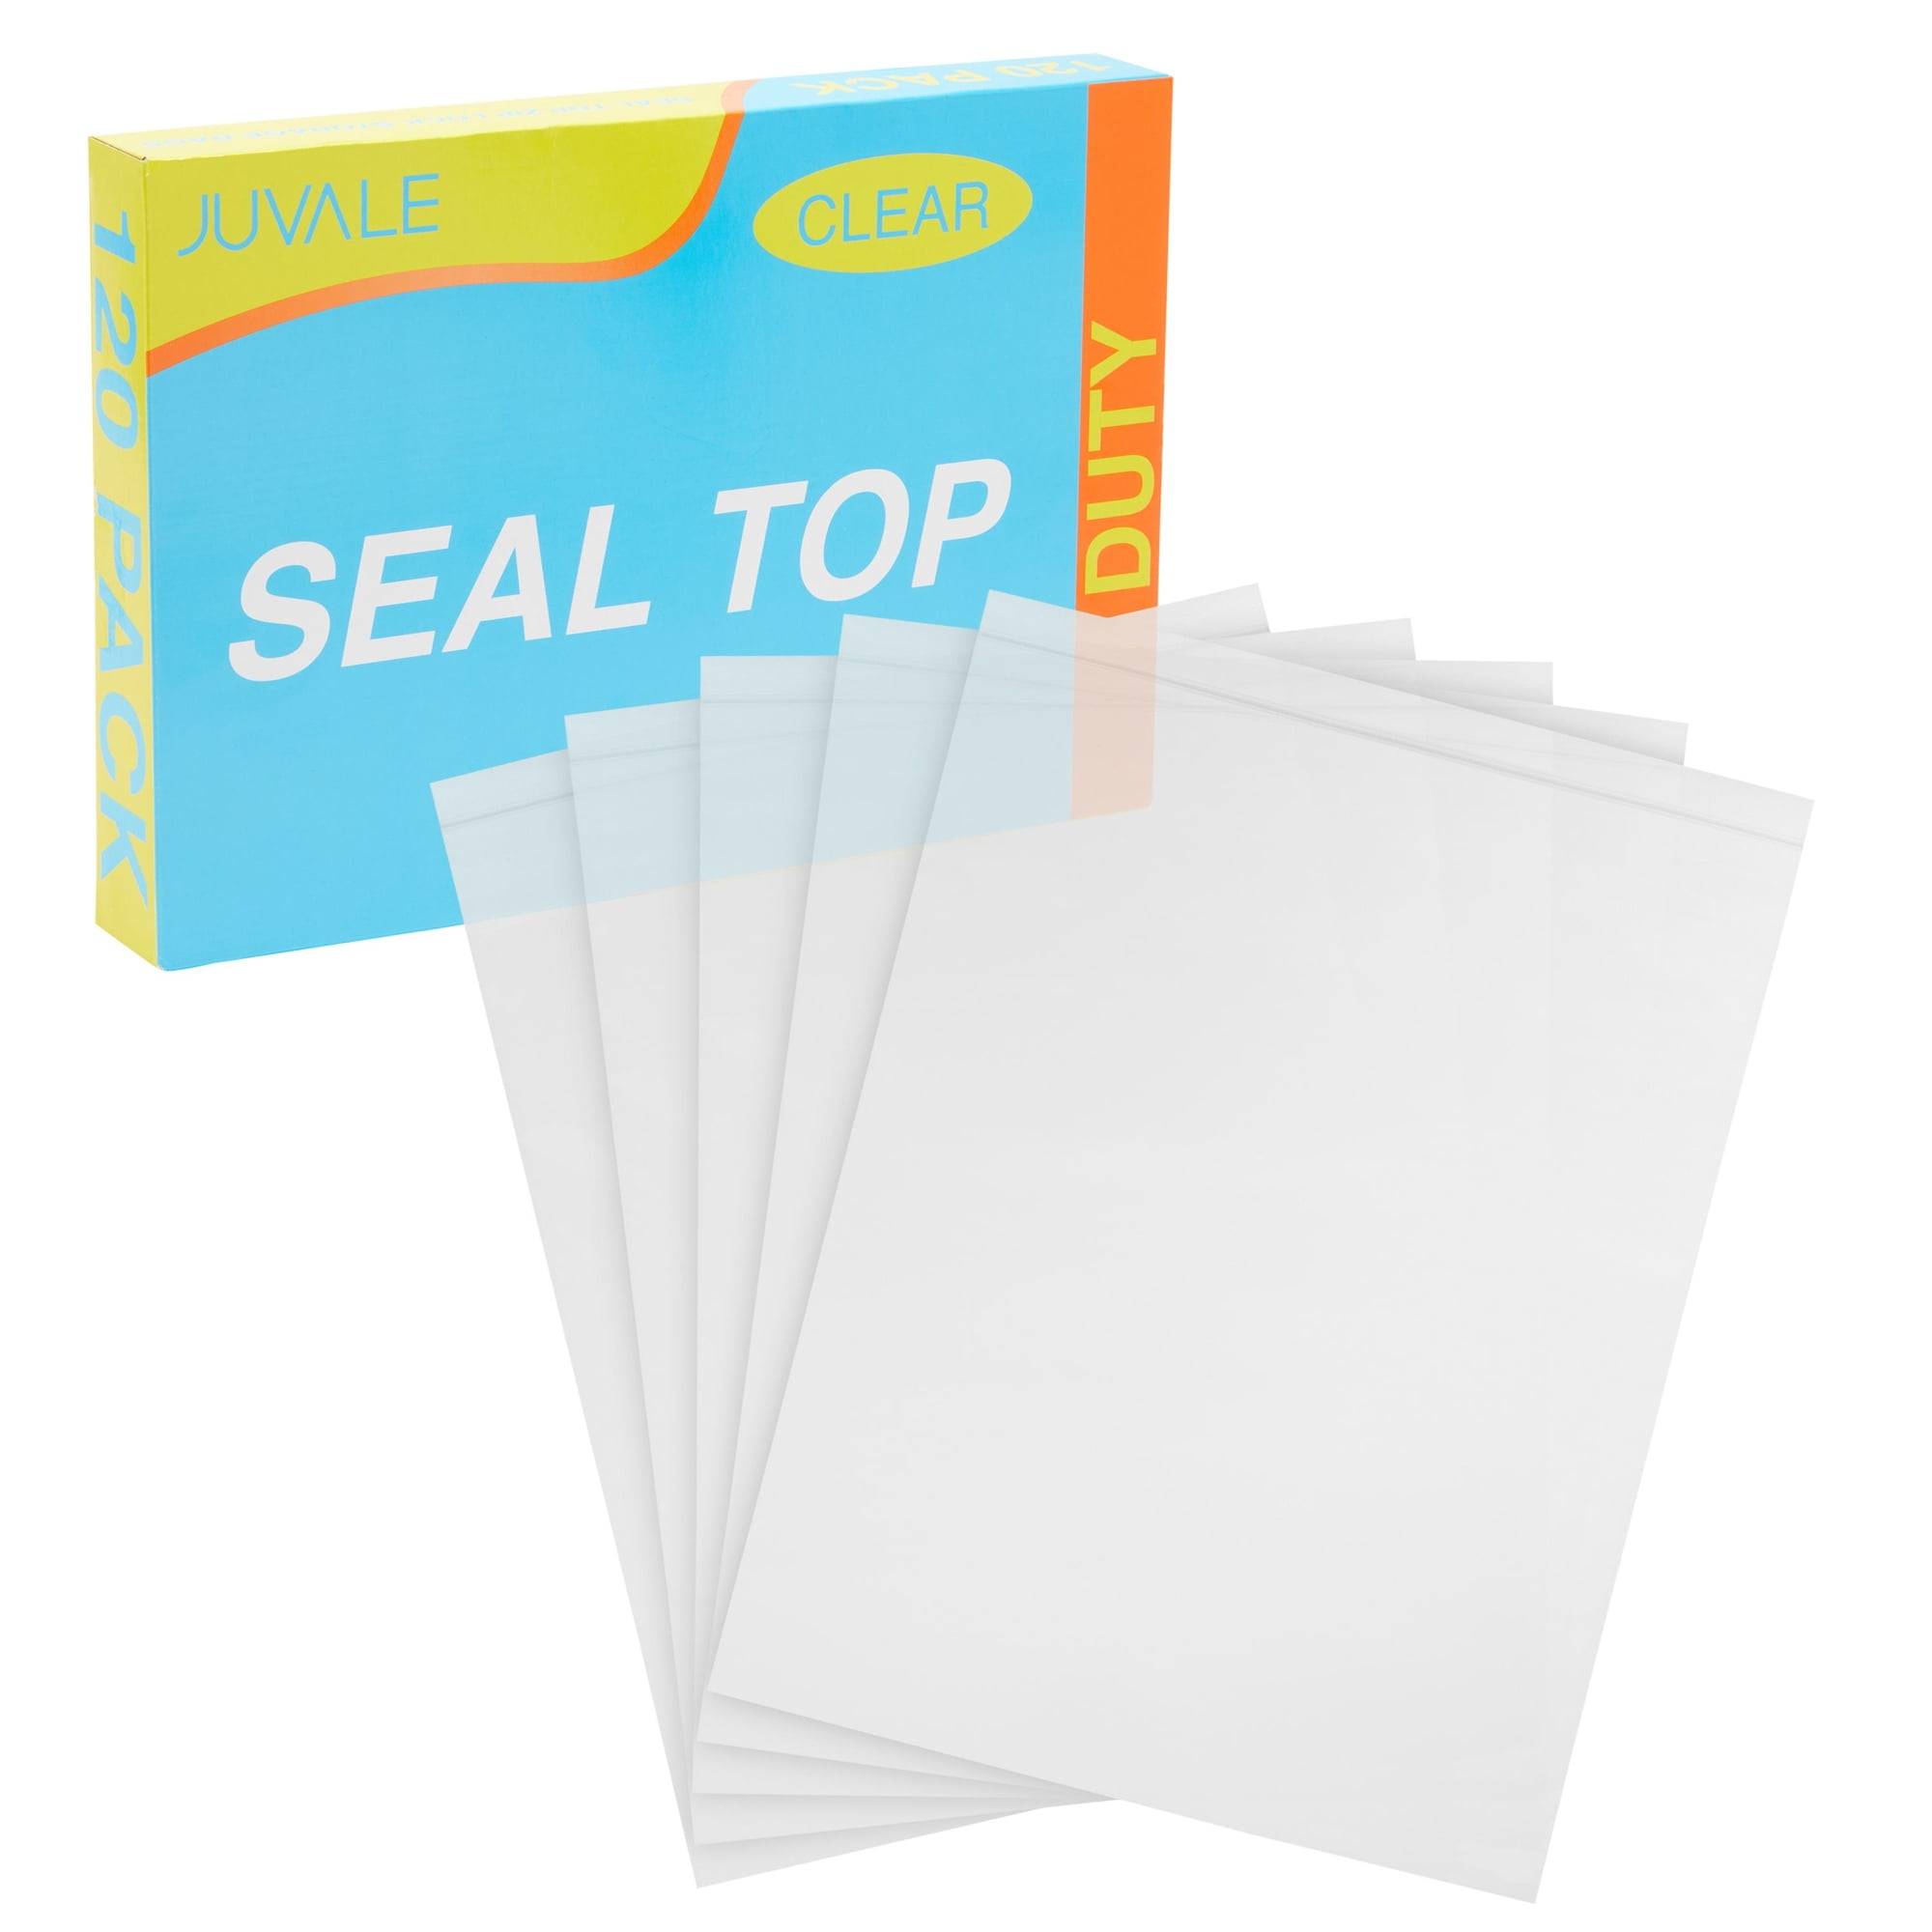 120 ct Clear Poly Bags Reclosable Top Zip Seal Baggies Plastic Assorted Sizes